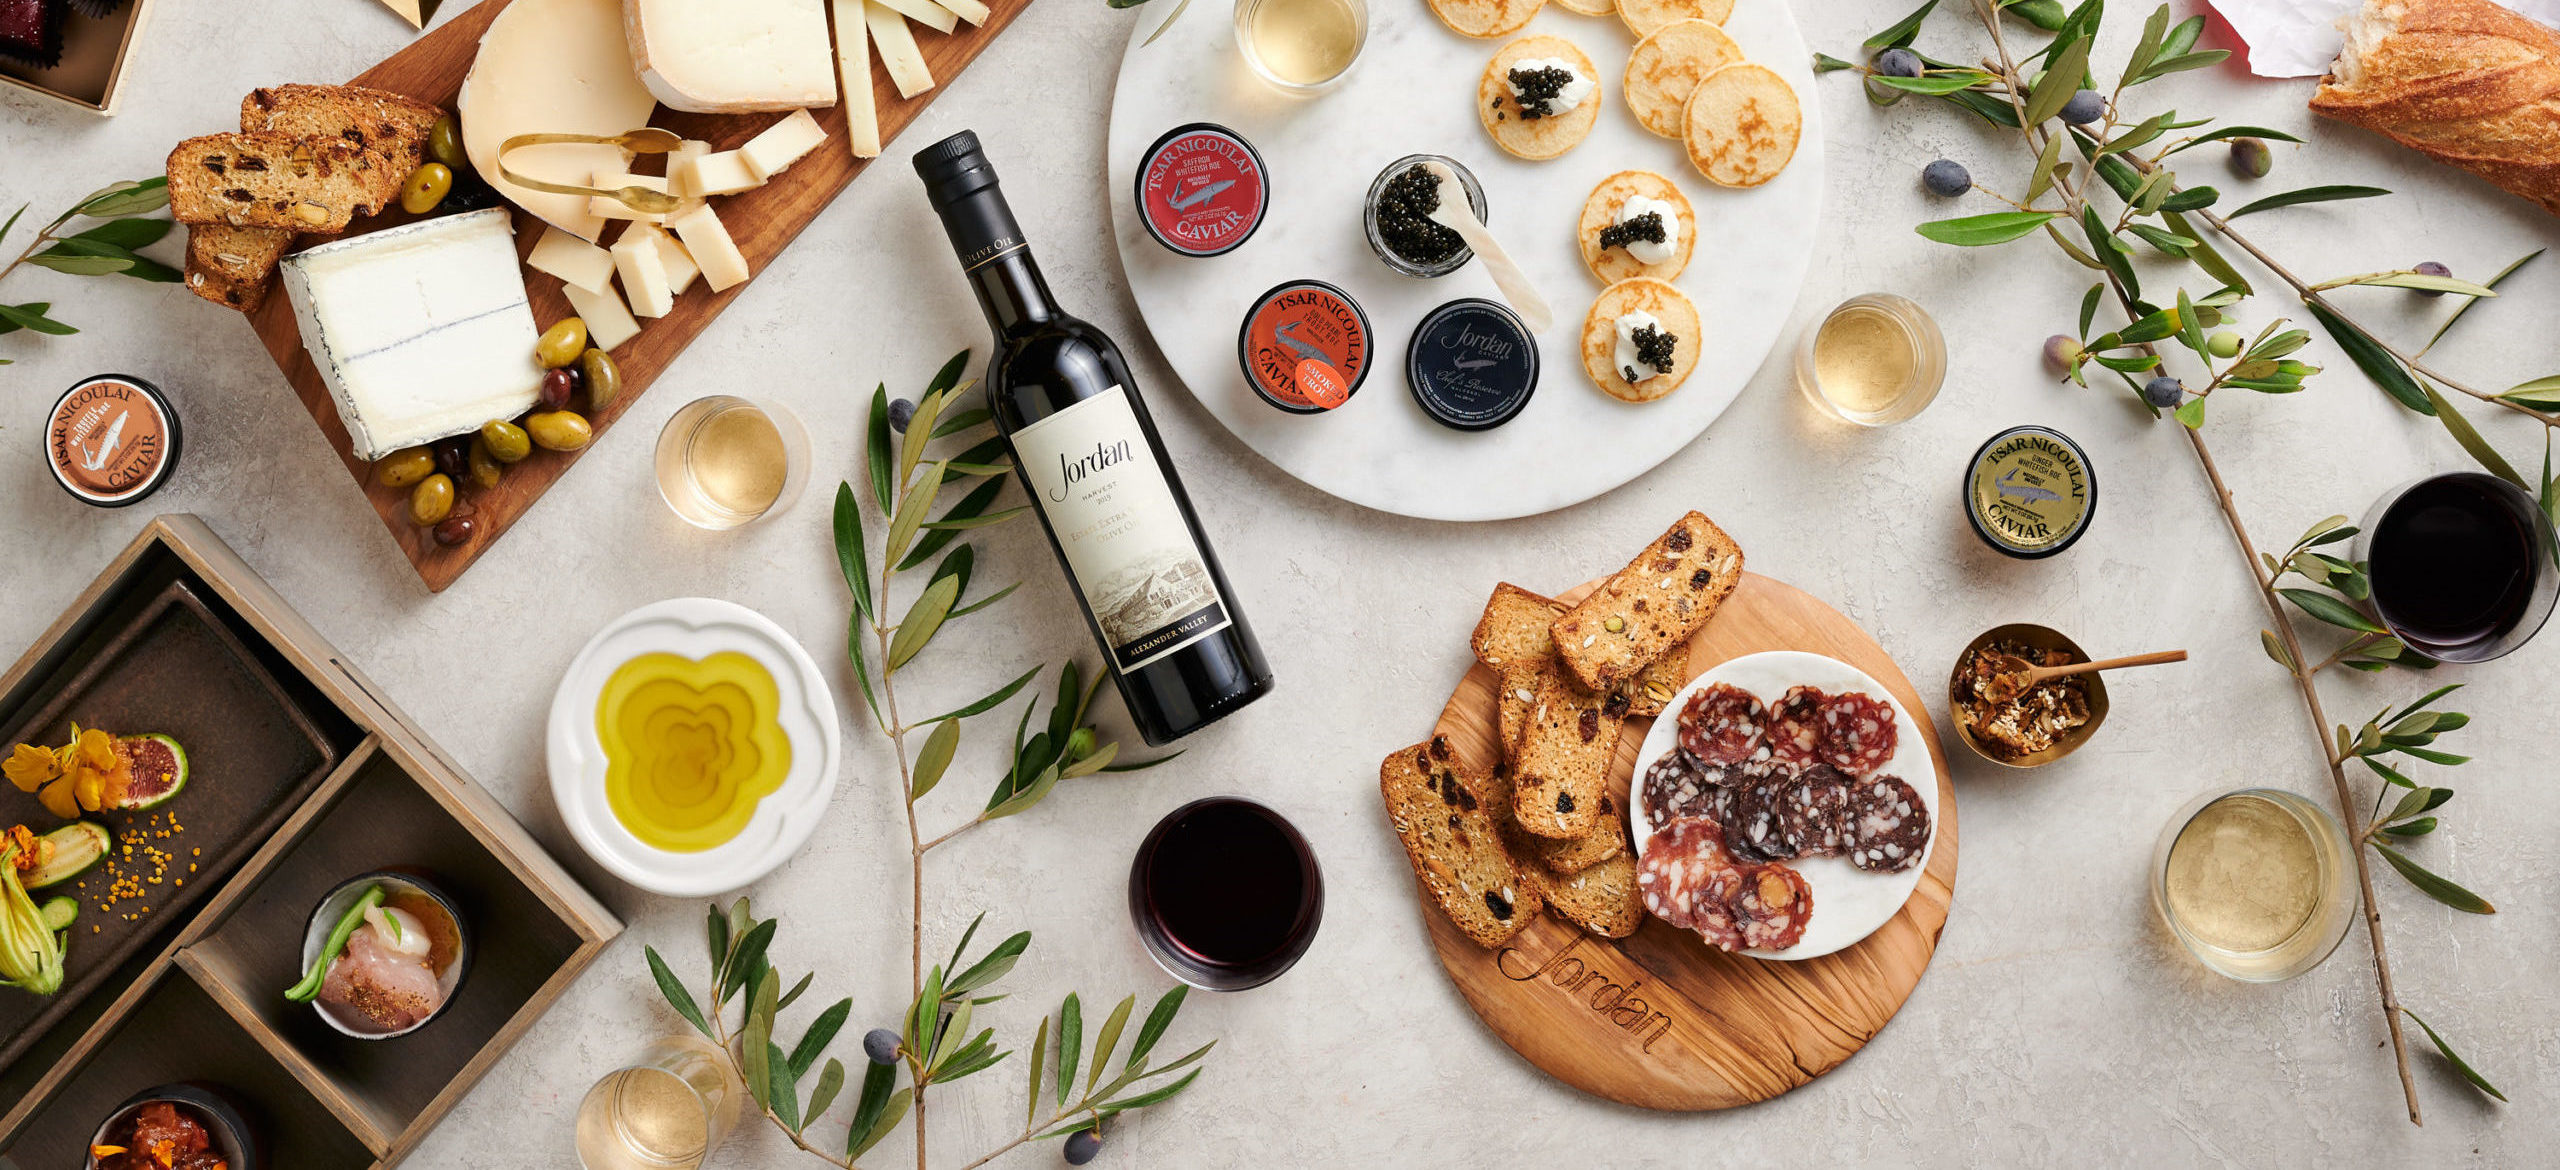 Jordan Olive Oil, Artisan Charcuterie Set and Chef’s Reserve Caviar on tabletop with olive branches